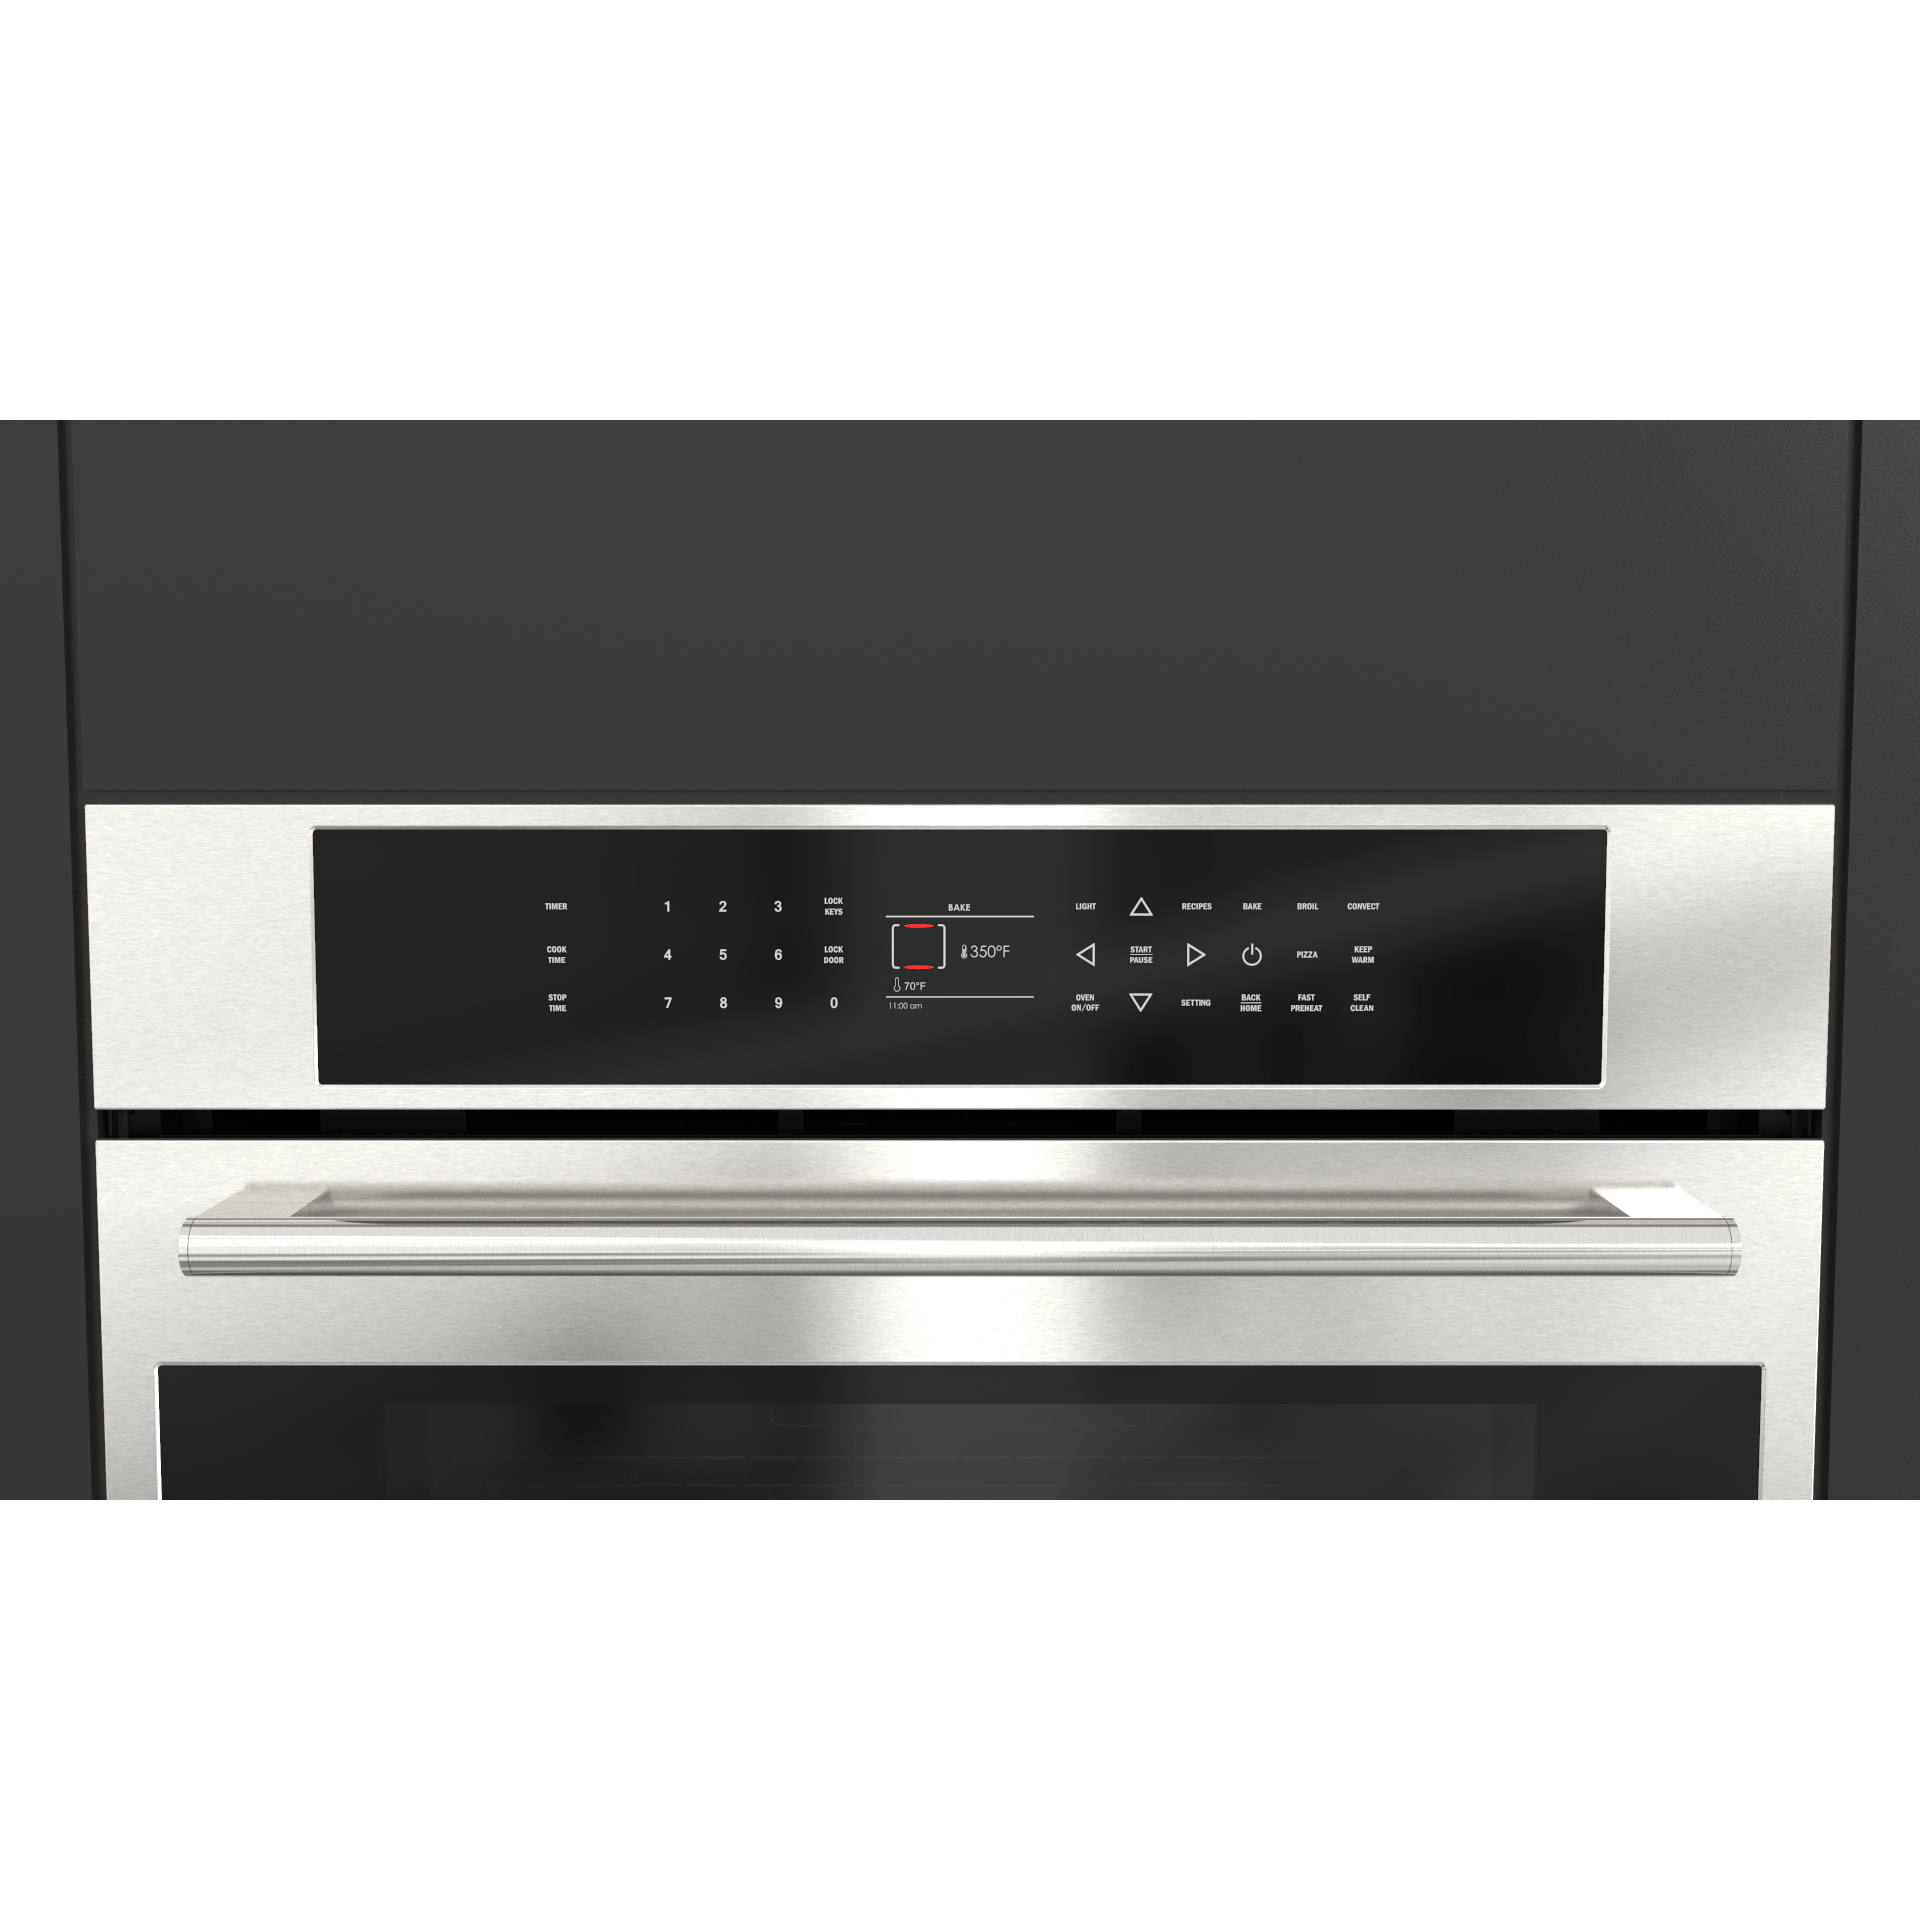 Fulgor Milano 30" Single Electric Wall Oven with 4.4 cu. ft. Gross Capacity - F7SP30S1 Wall Oven F7SP30S1 Luxury Appliances Direct